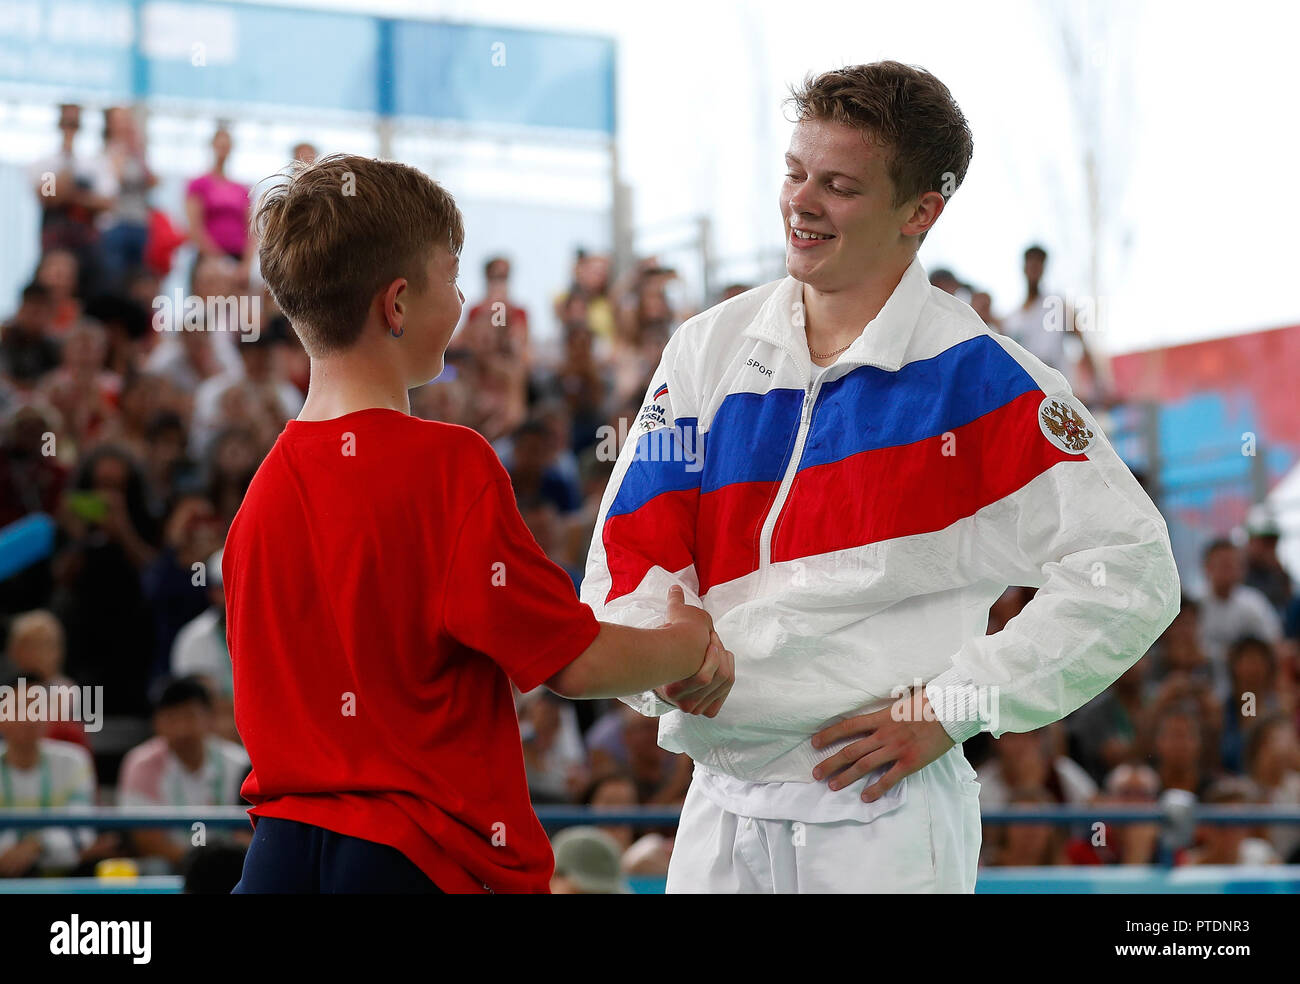 (181009) -- BUENOS AIRES, Oct. 9, 2018 (Xinhua) -- Russia's Bumblebee (R) greets France's Martin after the Breaking B-Boys Gold Medal Battle at the 2018 Summer Youth Olympic Games in Buenos Aires, Argentina on Oct. 8, 2018. Bumblebee claimed the title. (Xinhua/Wang Lili) Stock Photo